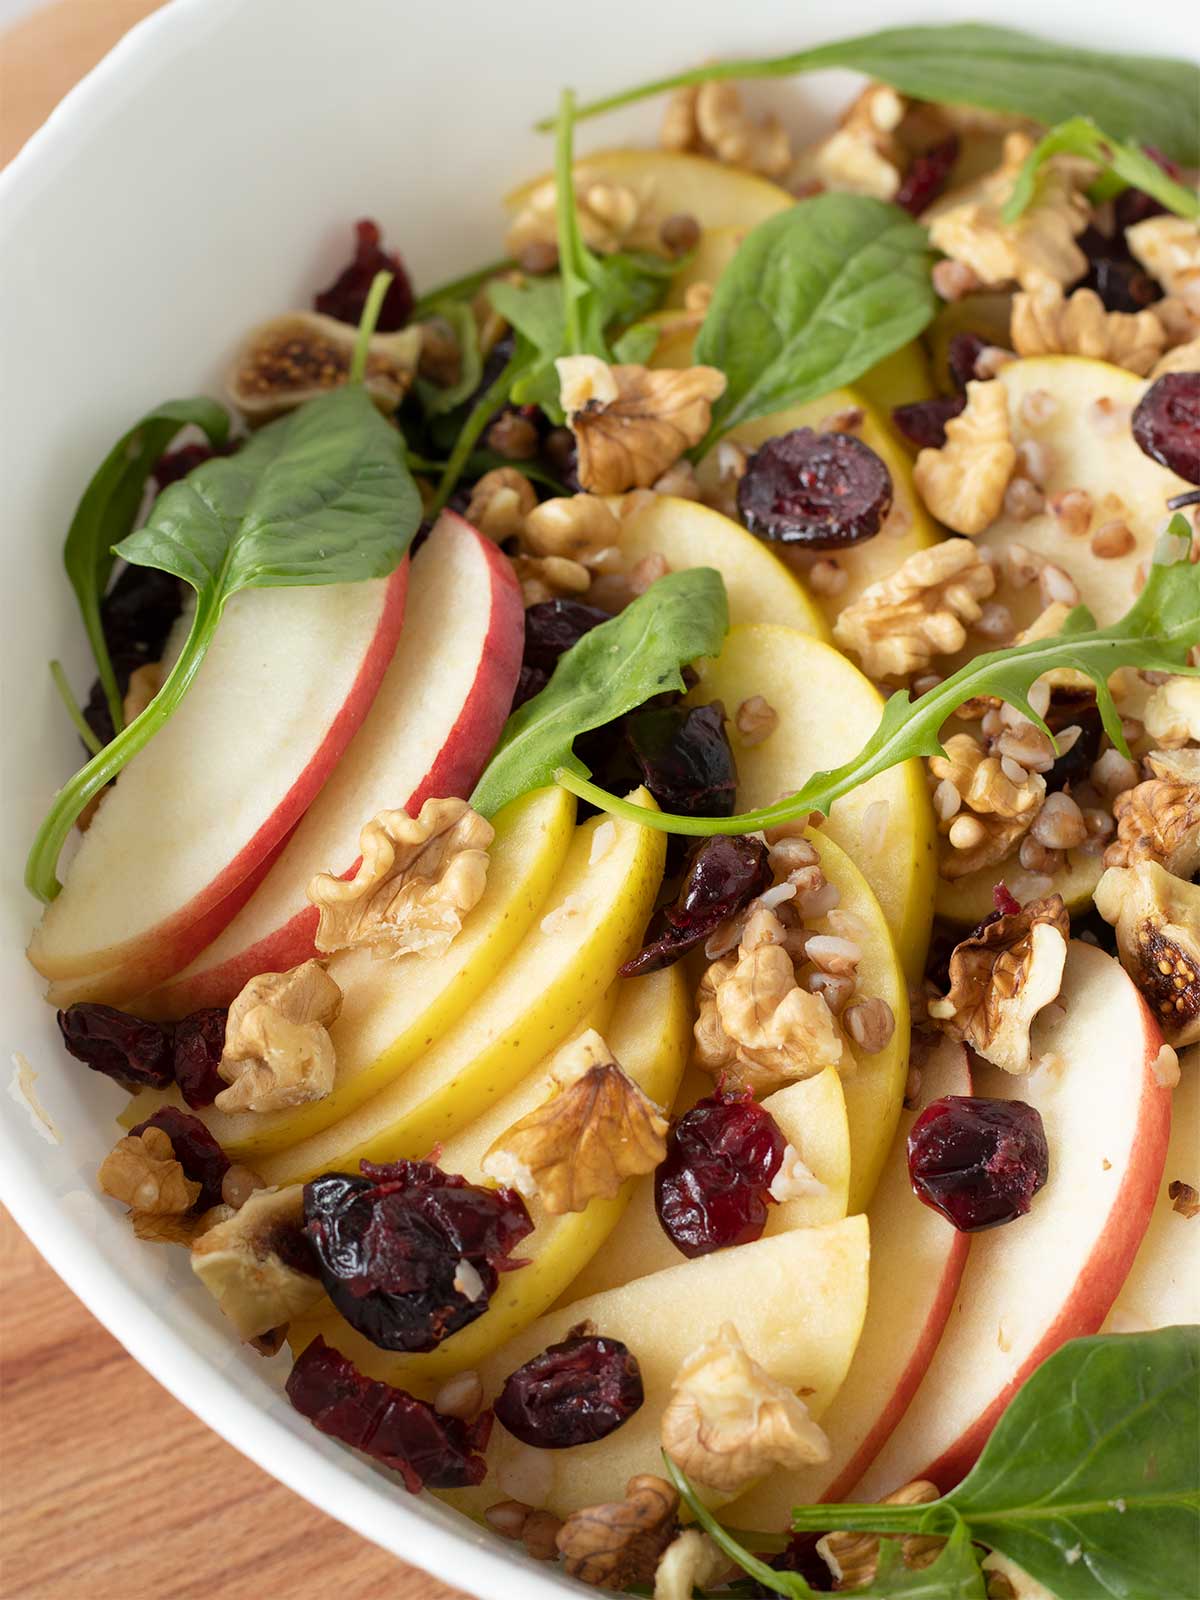 Easy vegan thanksgiving salad with apples, walnuts,spinach, buckwheat and cranberries